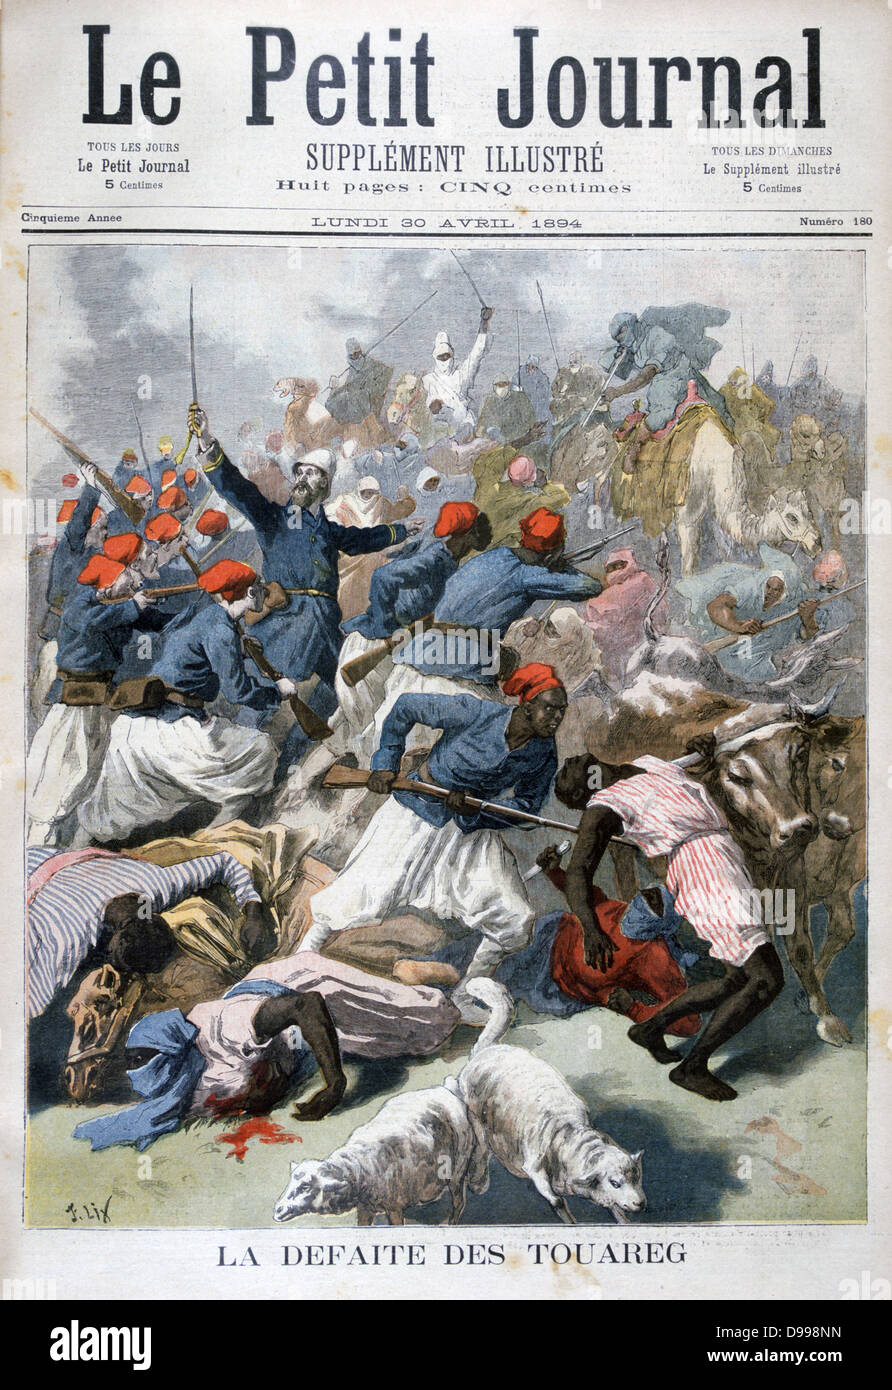 French colonial forces in the Sudan in a battle with Touaregs, 23 March 1894.  From 'Le Petit Journal', Paris, 30 April 1894. France, Africa, Colonialism, War Stock Photo